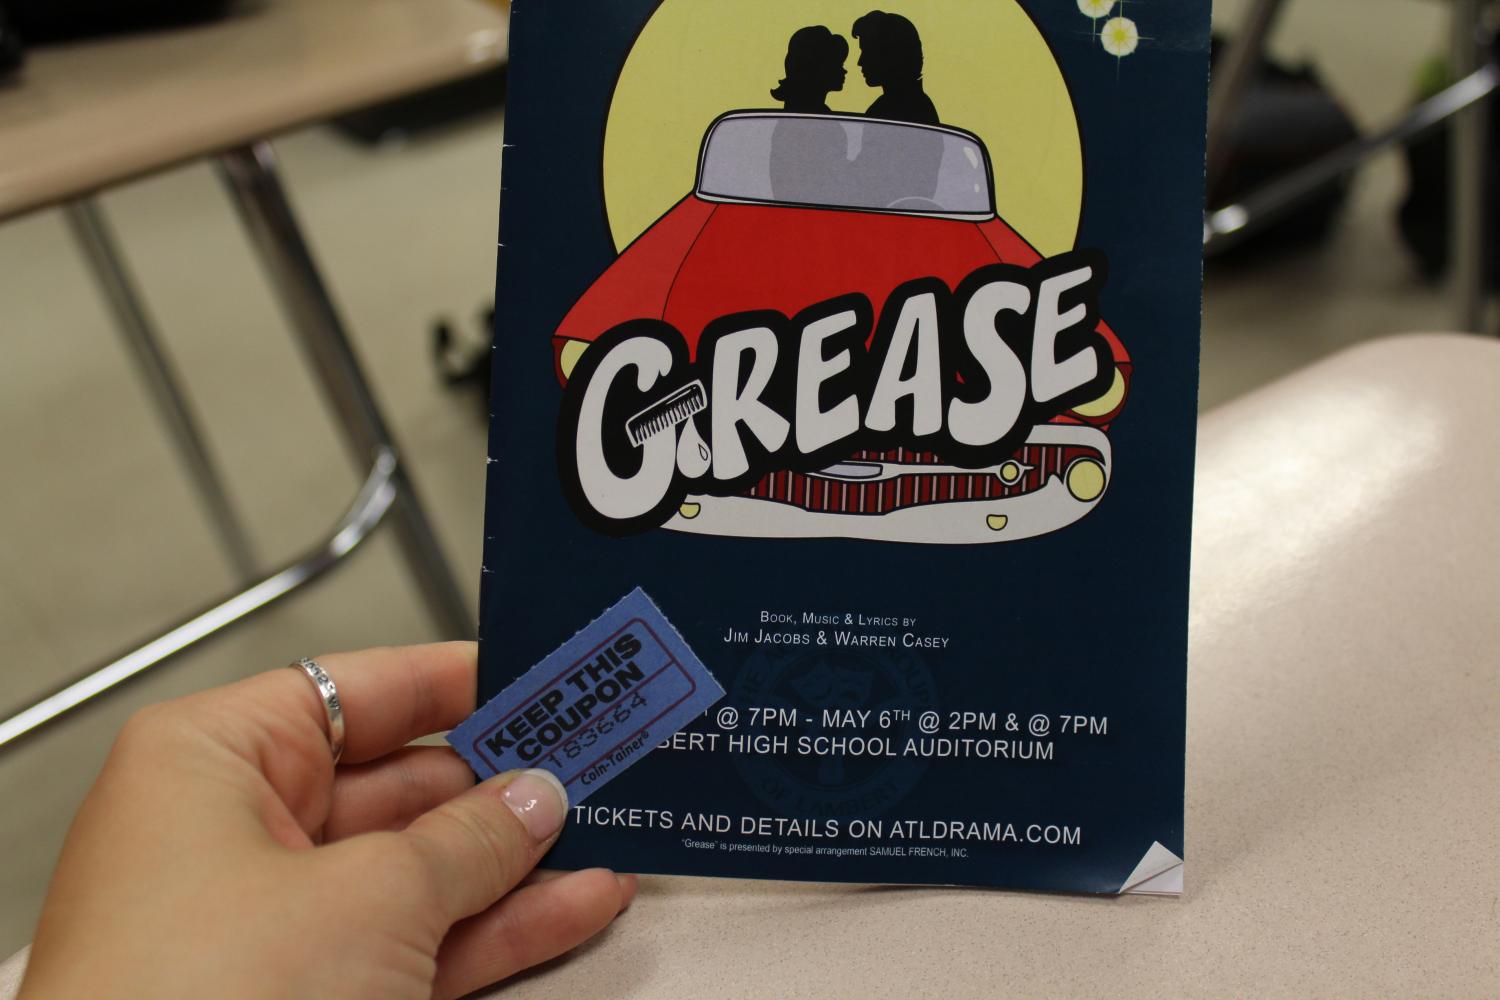 The production of Grease was full of songs from the film, but a crowd favorite was We Go Together.